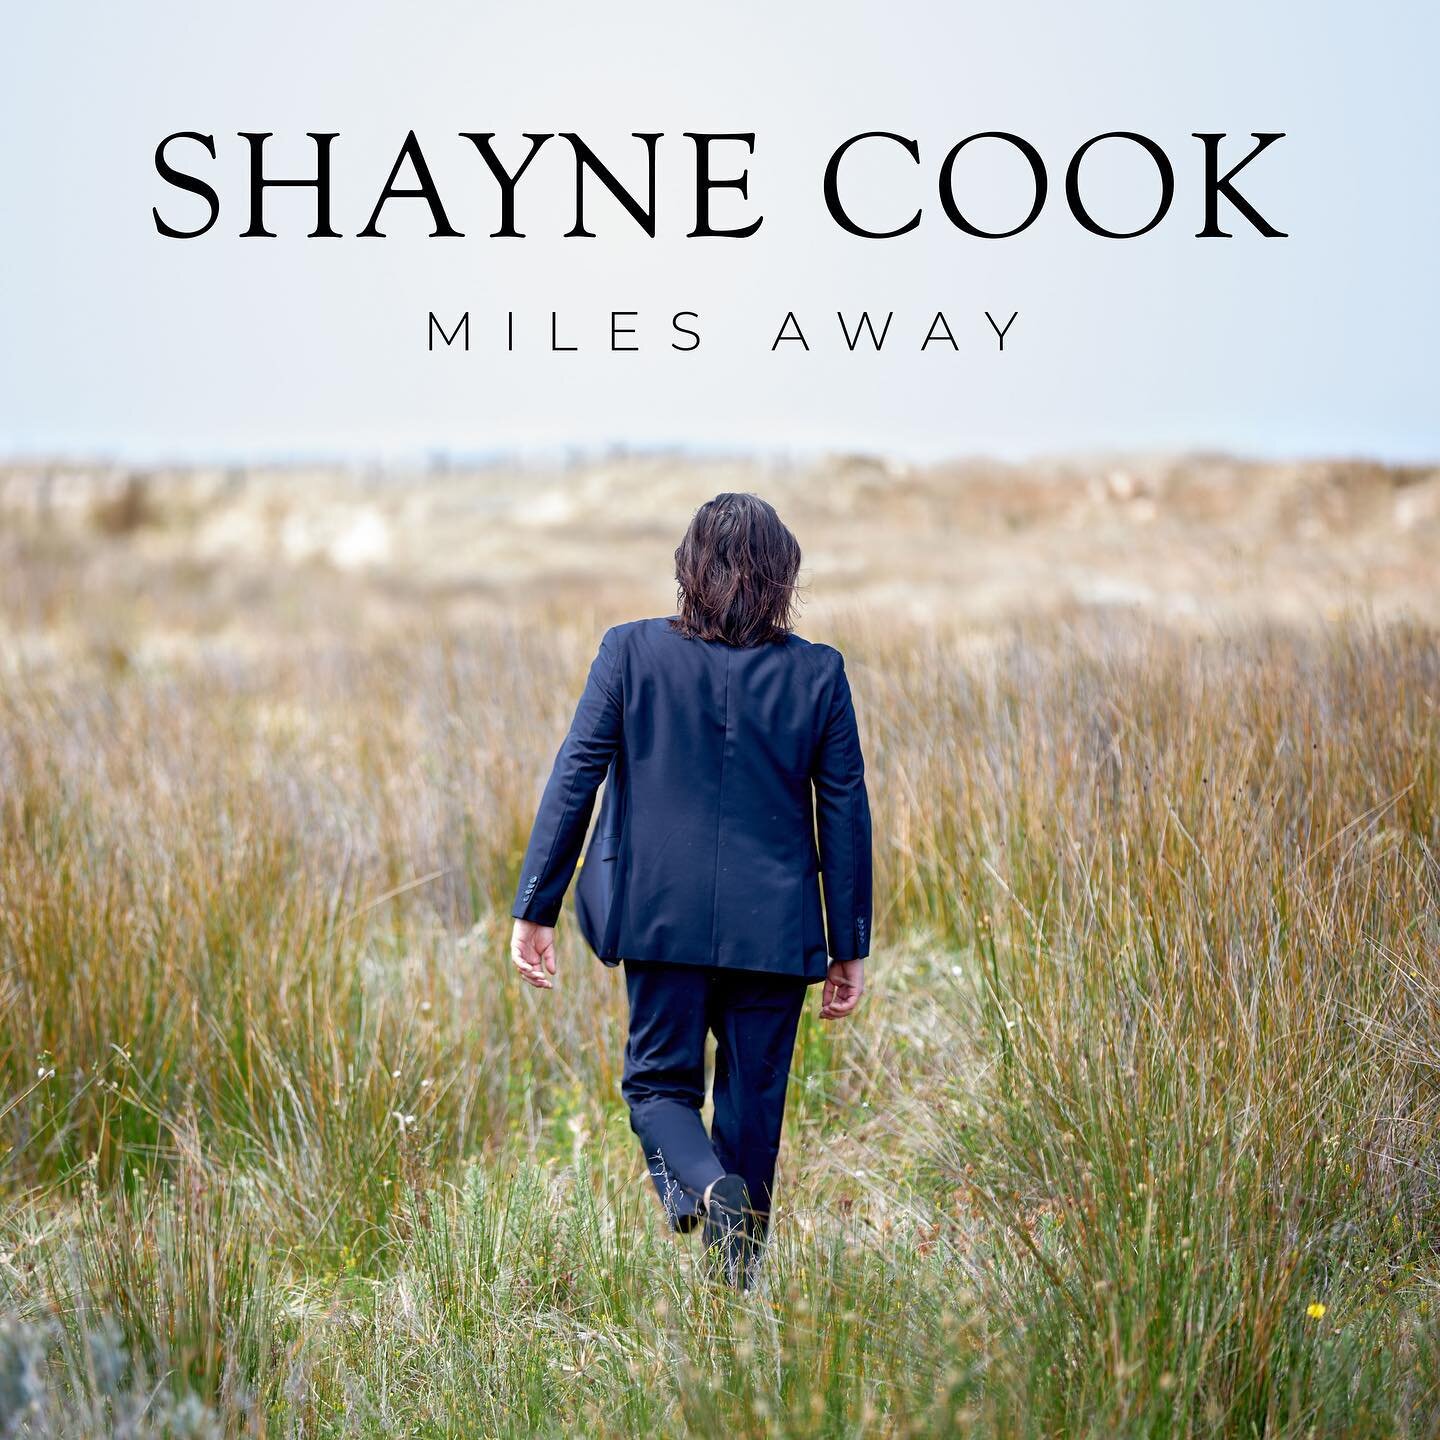 &lsquo;Miles Away&rsquo; out now on all platforms

Co written by top man @richardgrewar @marktheatlas 

Recorded at destination studios
@huntinggroundstudios &amp;
@fightnightrecords 

Man of many talents @harleytstewart 
On production / additional i